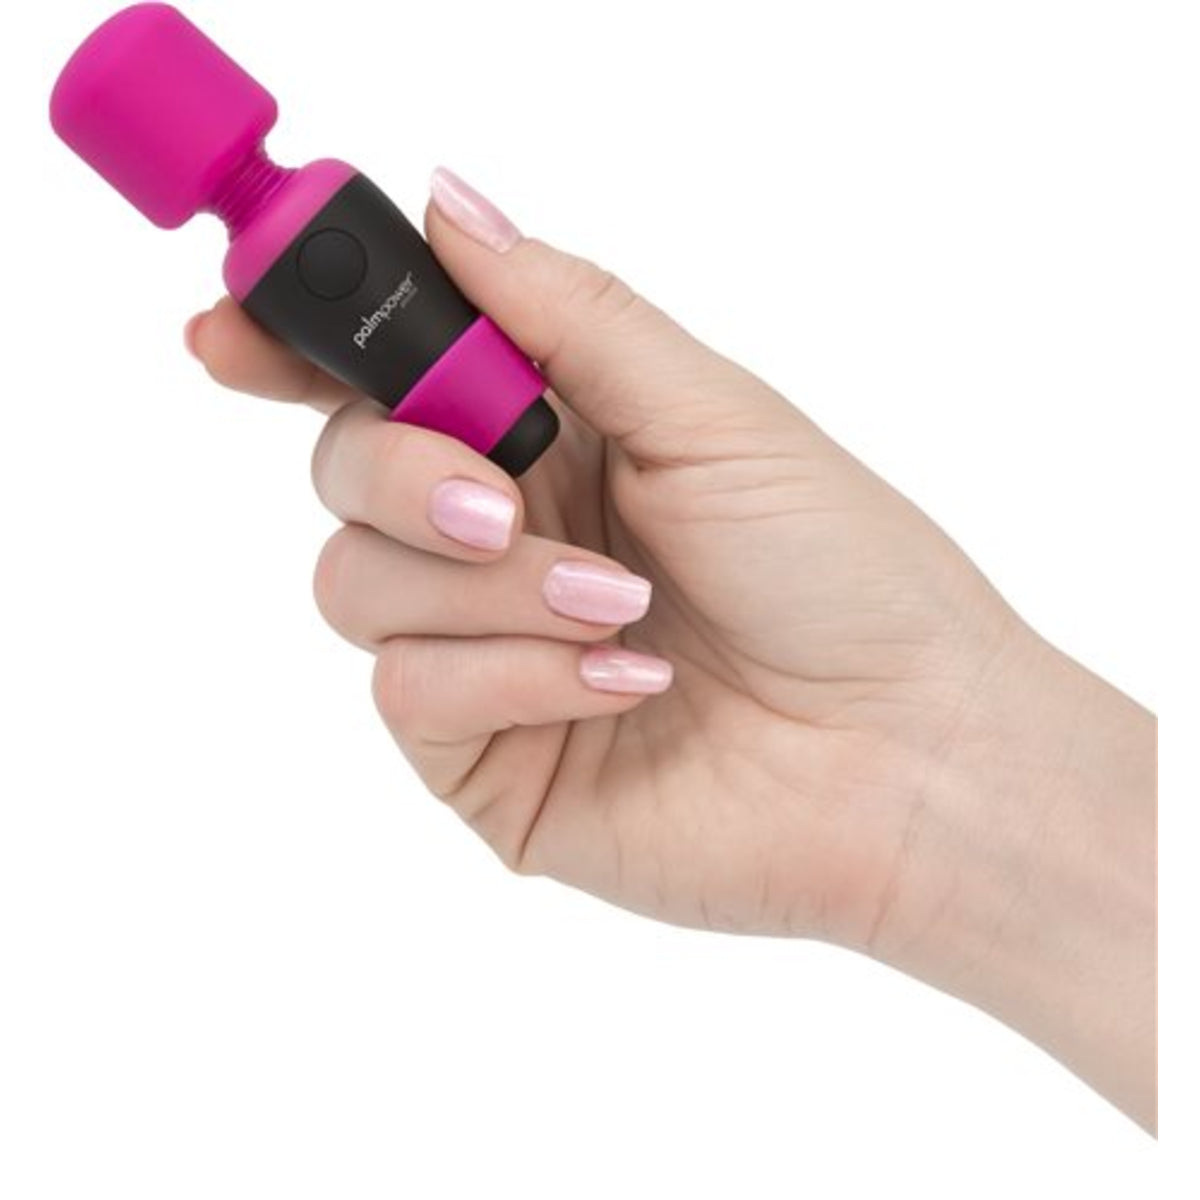 The Palm Pocket Vibe is the perfect mini clitoral stimulator that fits right in the palm of your hand!